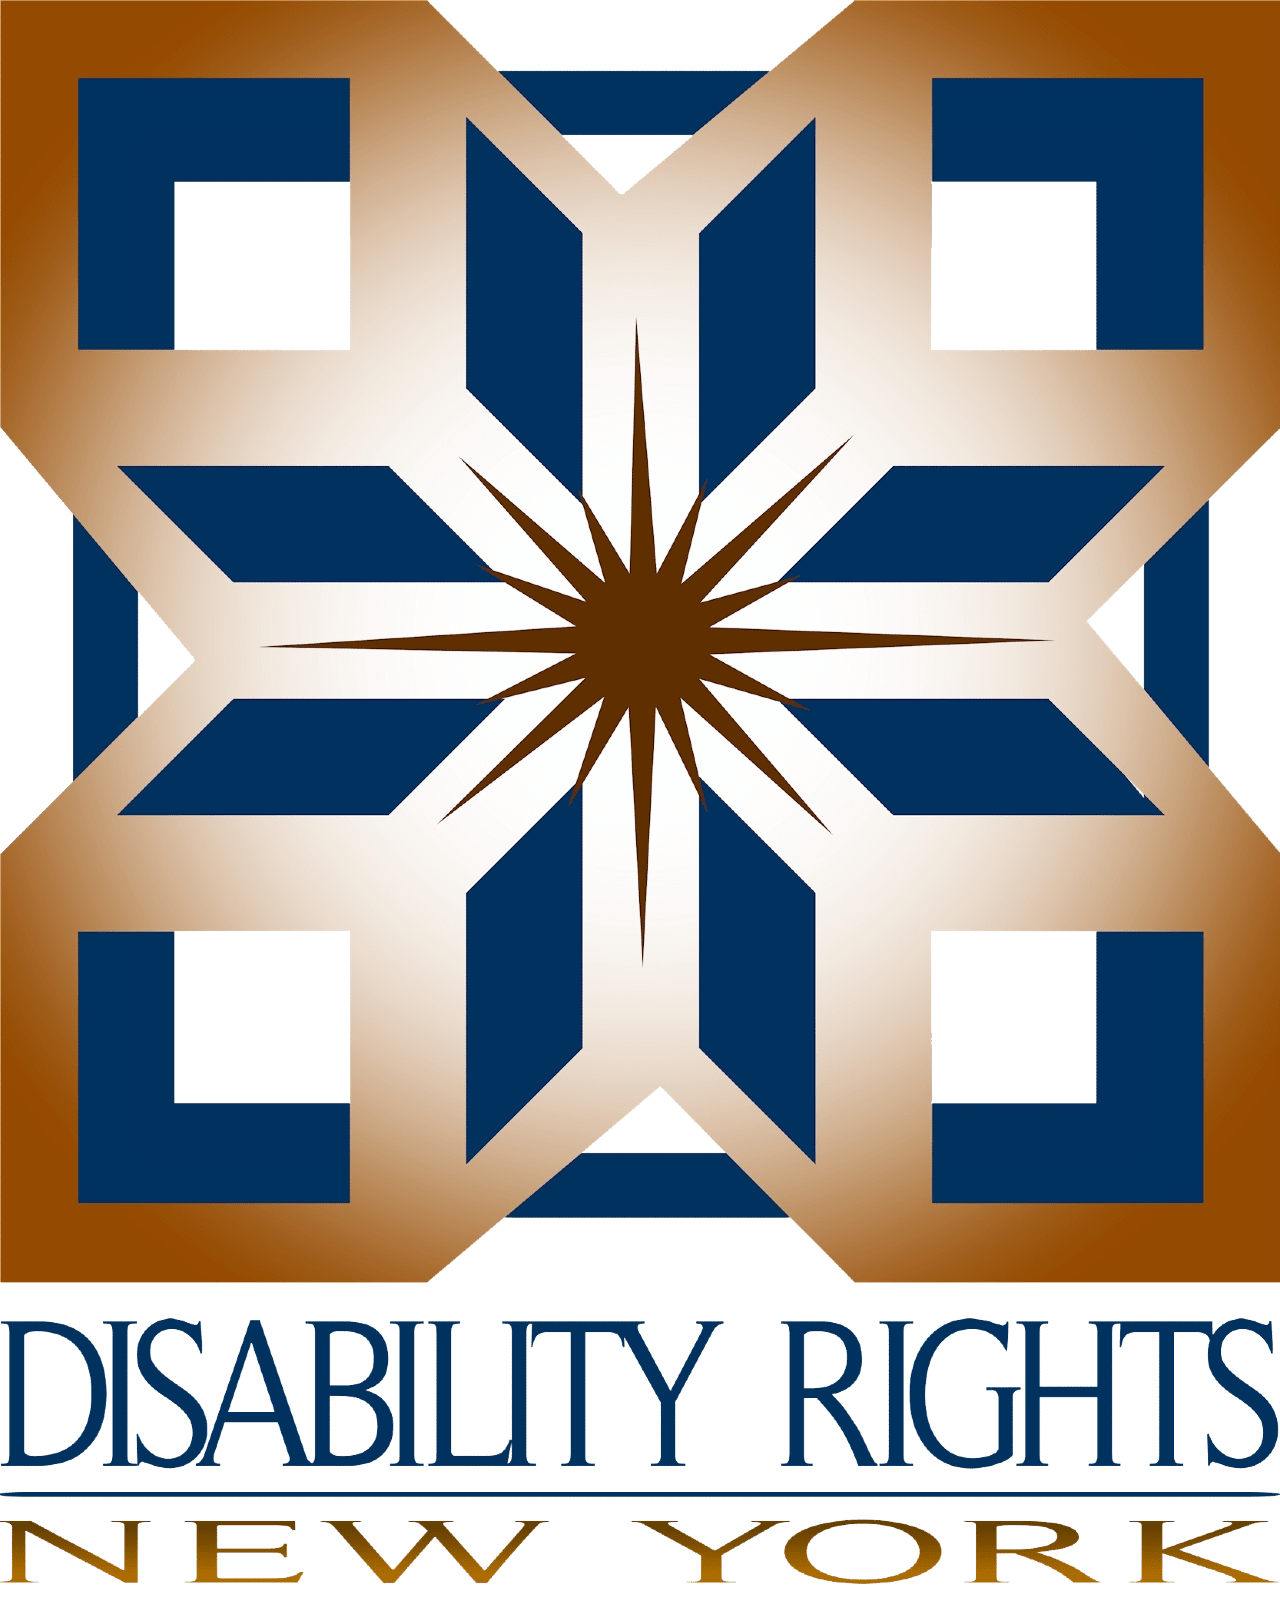 Disbility Rights New York